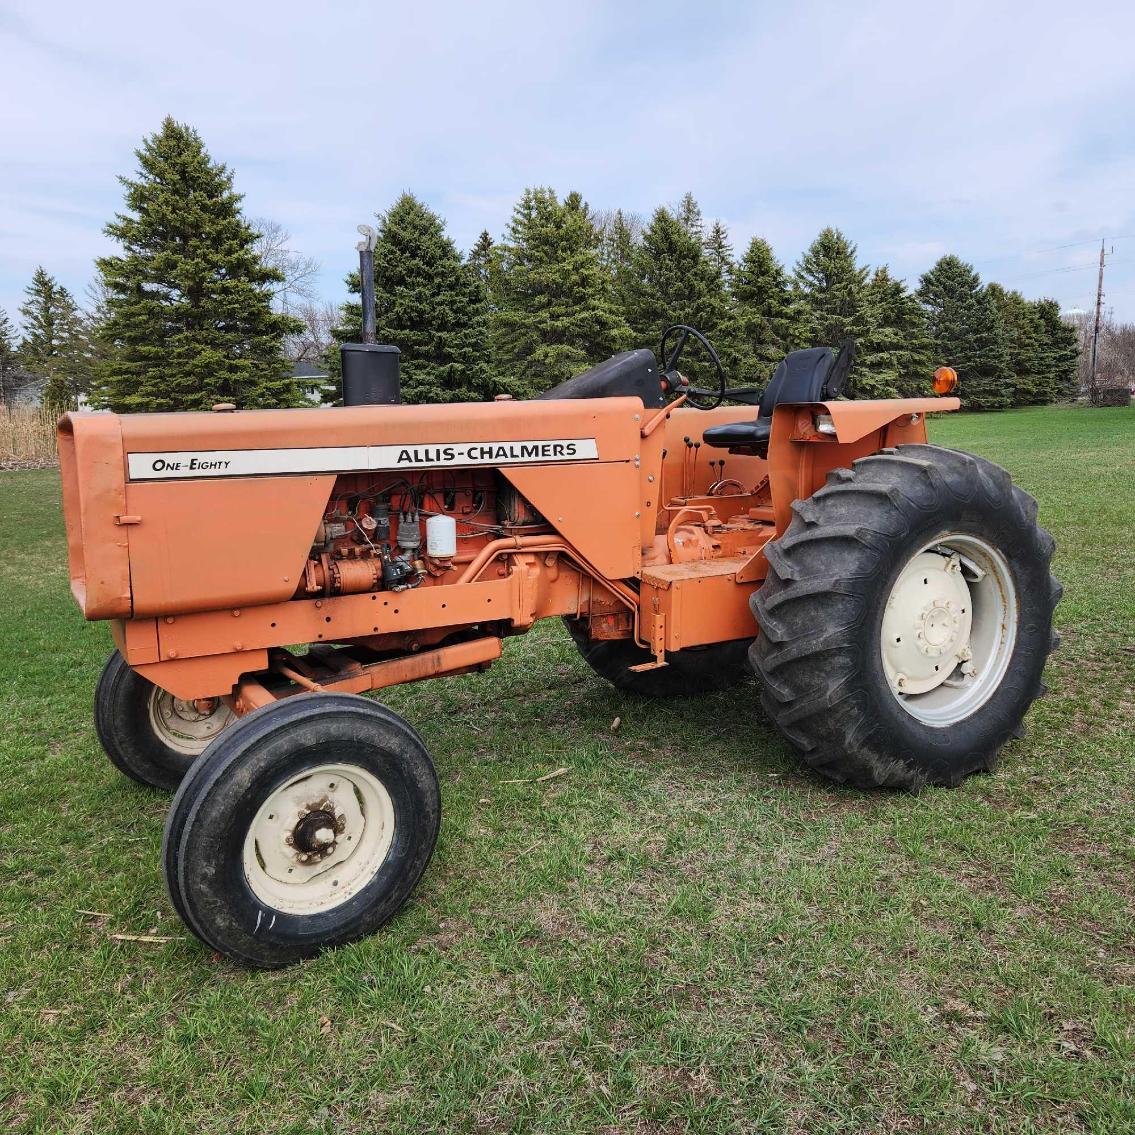 Farm Equipment, Trailers, Shipping Containers, Recreational, Lawnmowers Consignment Auction